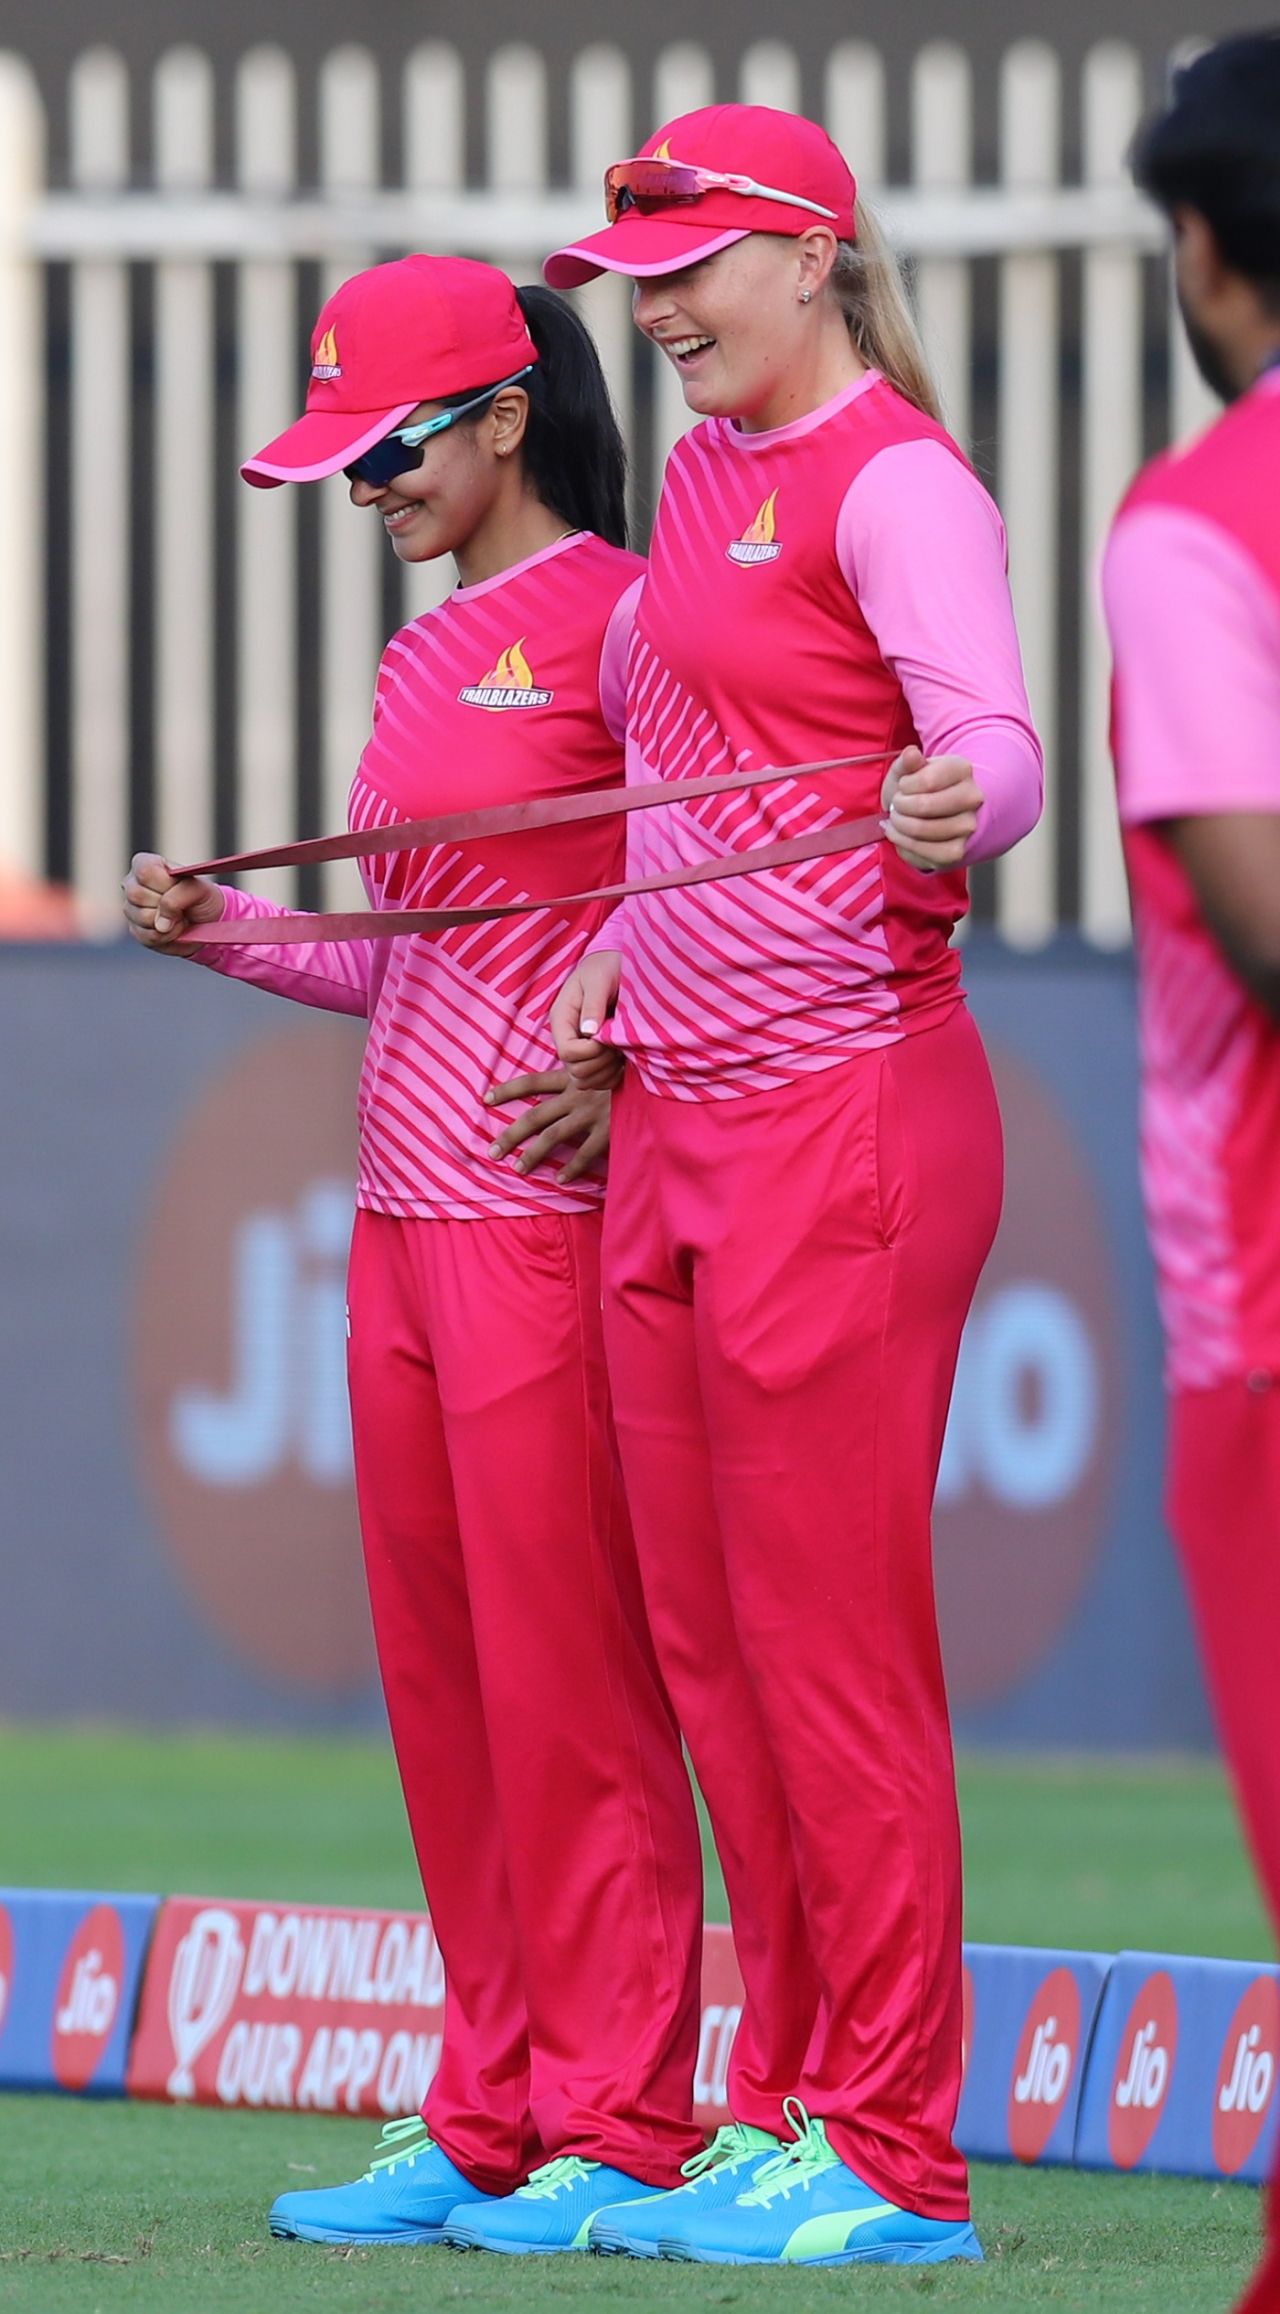 Harleen Deol and Sophie Ecclestone have a bit of fun while warming up, Trailblazers vs Supernovas, Women's T20 Challenge 2020, Sharjah, November 7, 2020 